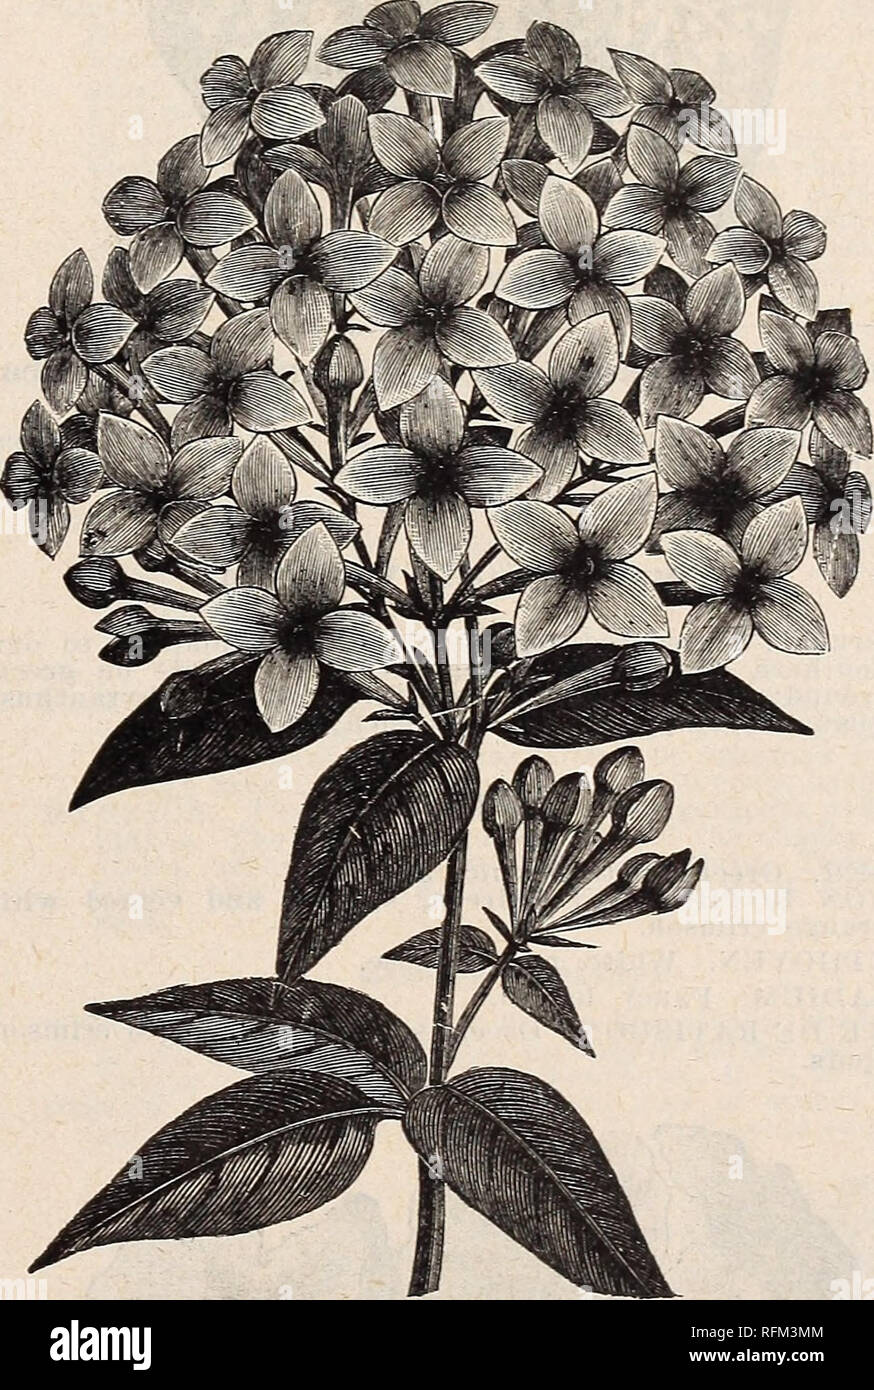 . Floral catalogue : illustrated. Nurseries (Horticulture) Kentucky Louisville Catalogs; Plants, Ornamental Catalogs; Flowers Catalogs; Trees Seedlings Catalogs; Fruit Catalogs. ROSEA MULTIFLORA. This is a sport of the well-known B. Elegans. While inheriting the vigorous growth of its parent, it has larger dark pink flowers of a distinct and handsome shade, but its greatest characteristic is that it is a really ever-blooming variety, introduced by us. THE BRIDE. A fine novelty, brightest pink, large white eye, exquisite. ' VREELANDII. Finest of the white bouvardias; valuable for bouqiiets, bes Stock Photo